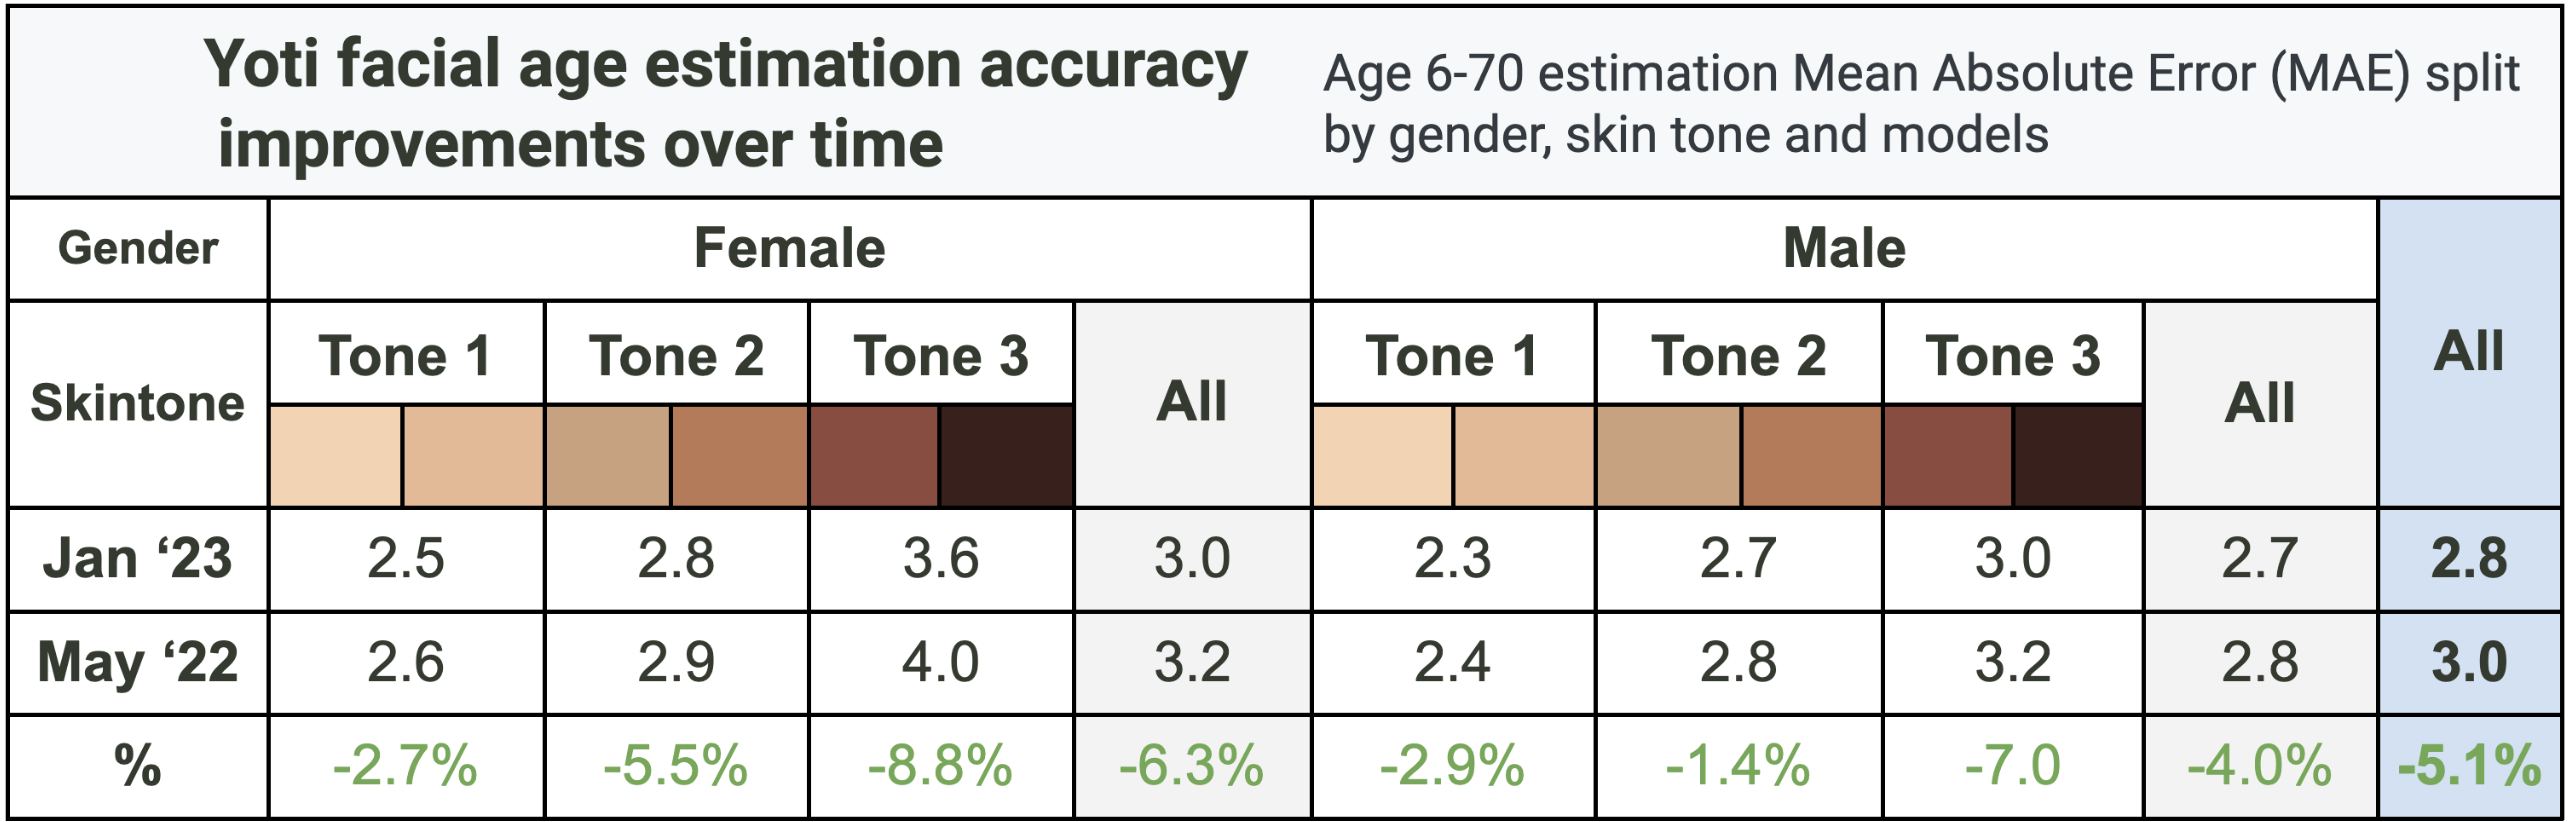 Table displaying yoti's facial age estimation improvements over time, with an average of 5.1% improvement across all skin tones and genders from May 22 to Jan 23